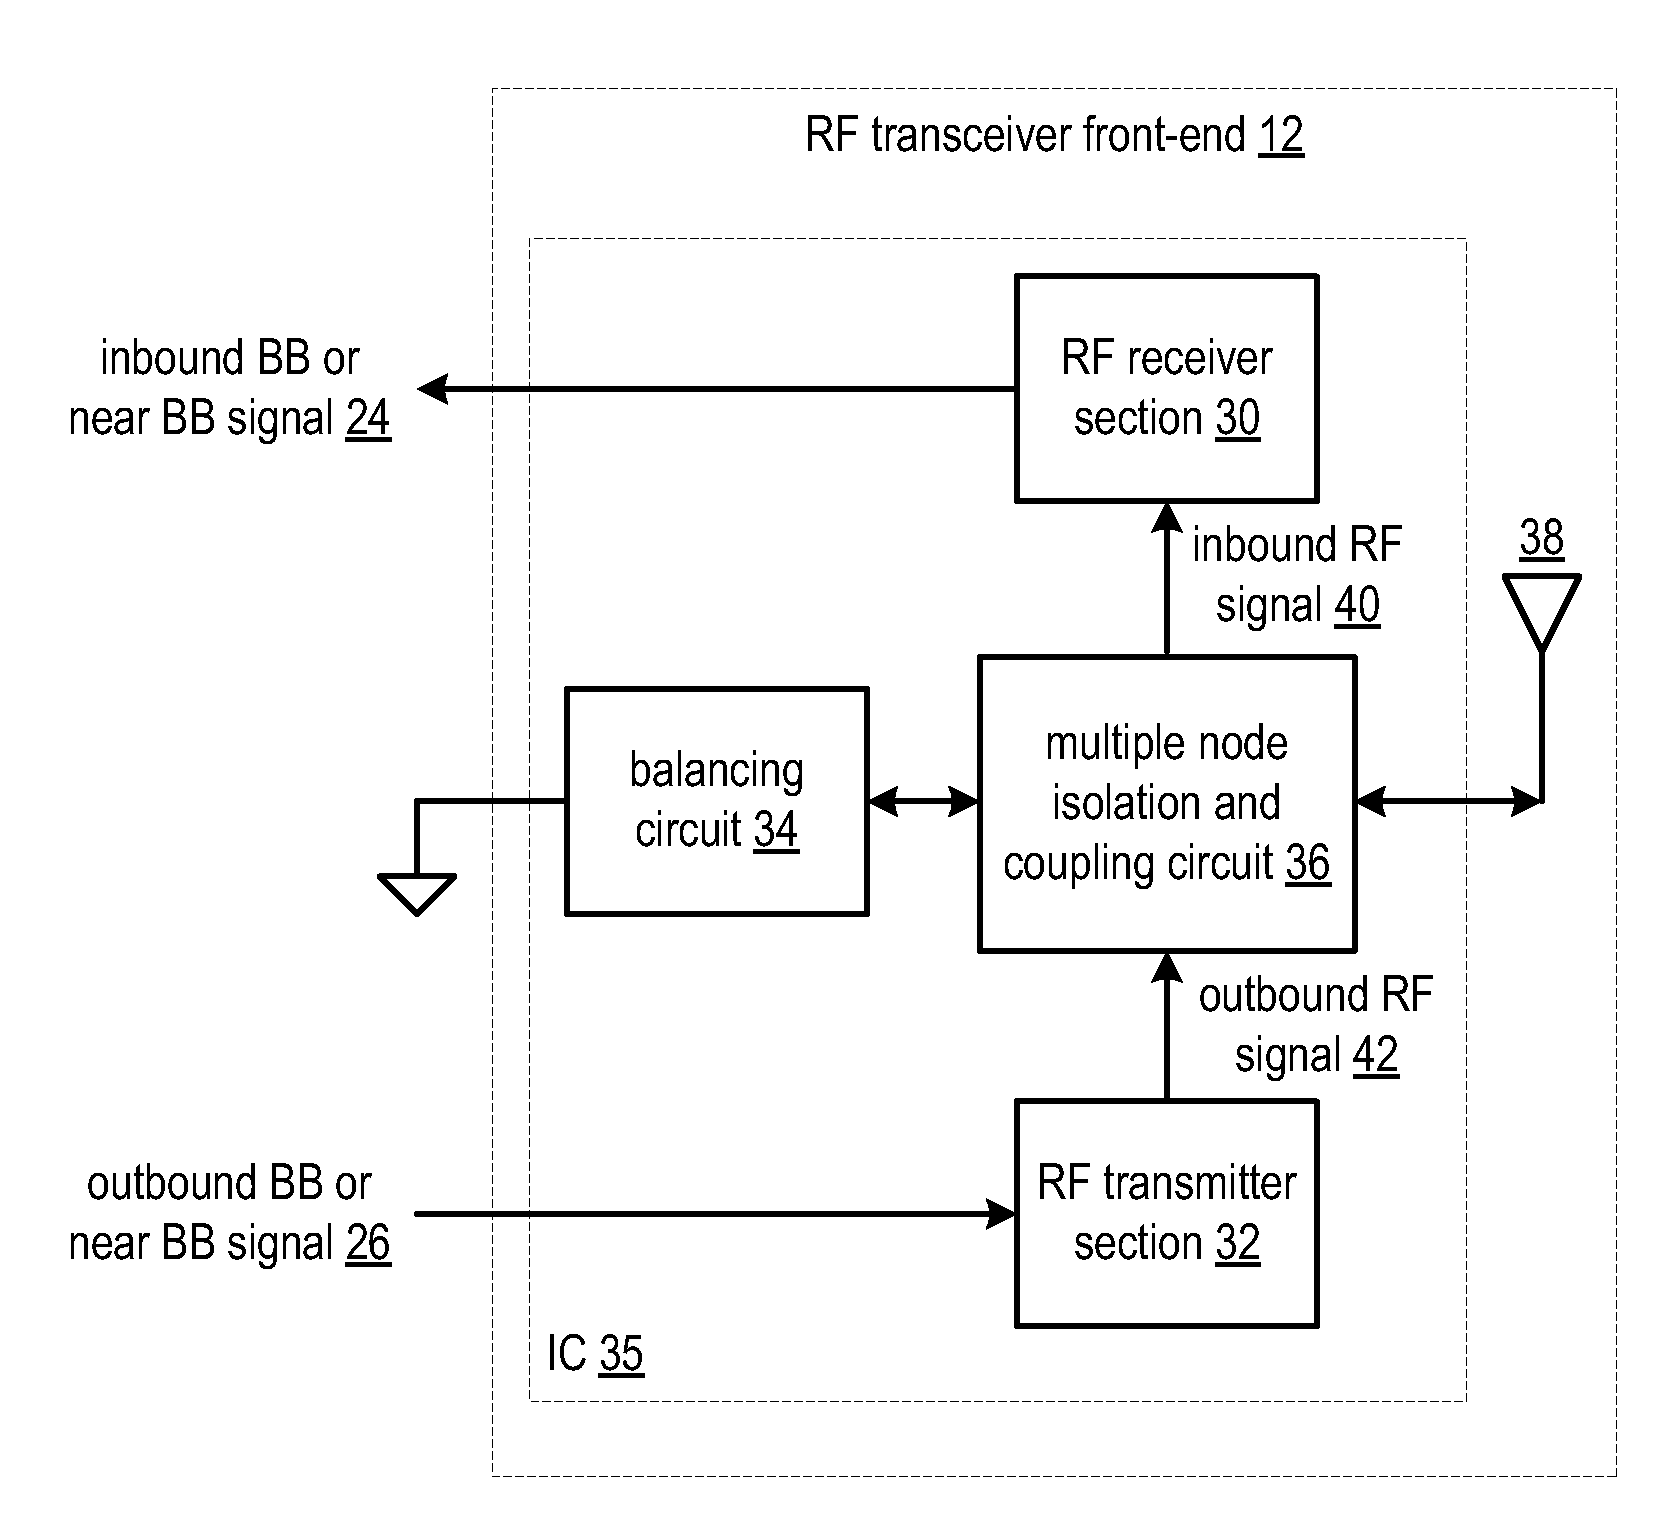 RF transceiver front-end with rx/tx isolation